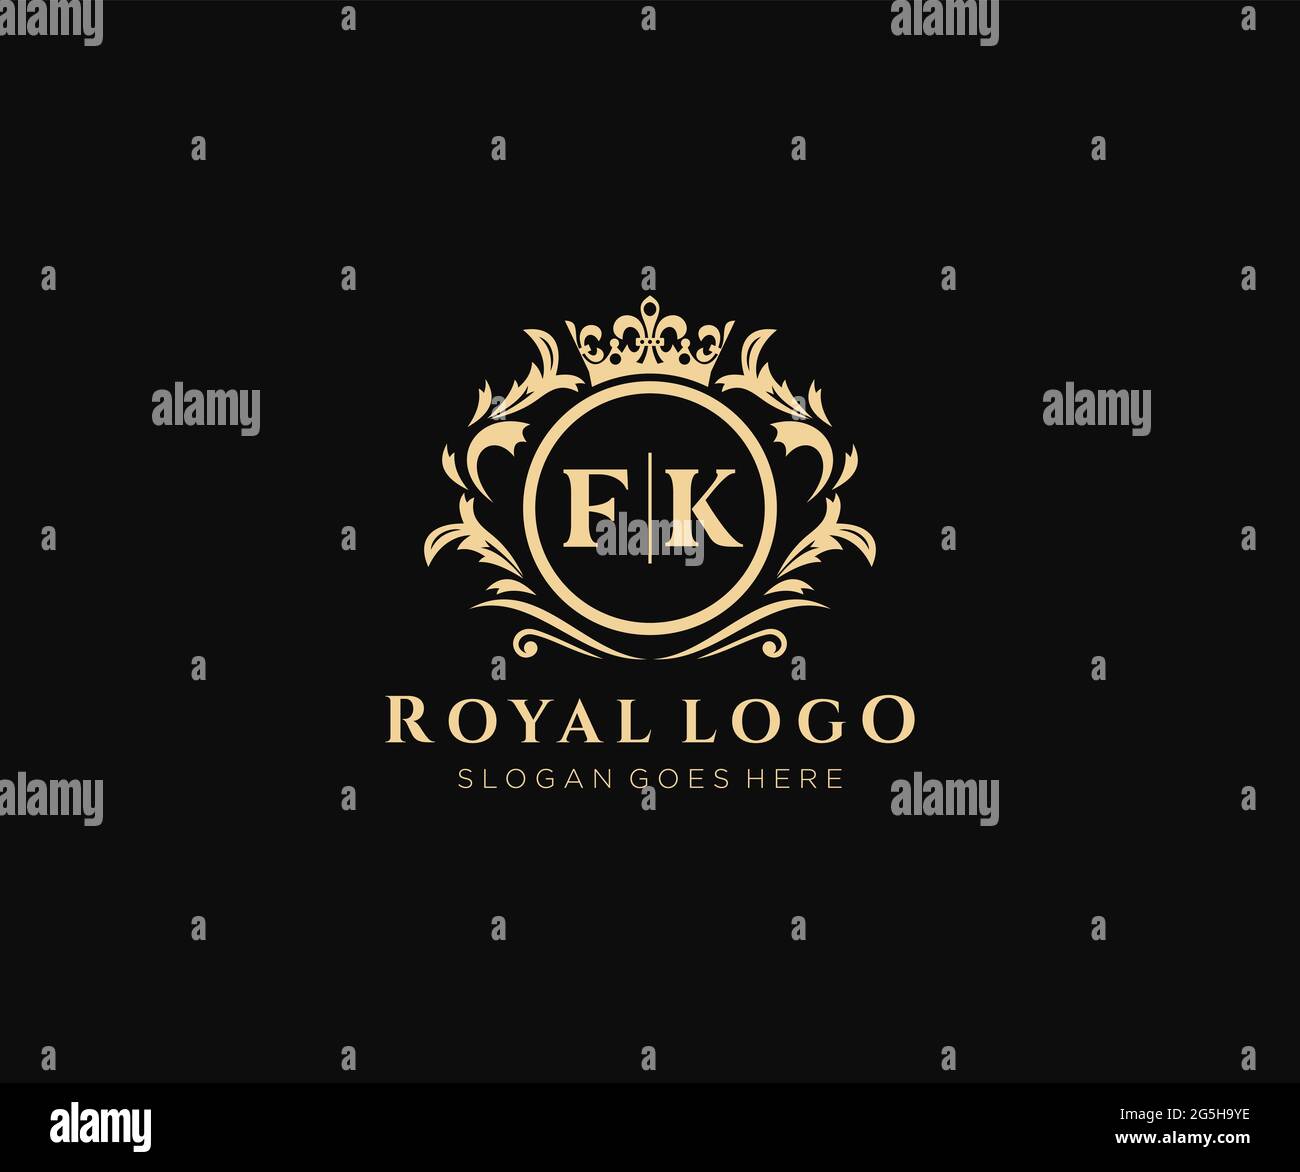 FK Letter Luxurious Brand Logo Template, for Restaurant, Royalty, Boutique, Cafe, Hotel, Heraldic, Jewelry, Fashion and other vector illustration. Stock Vector